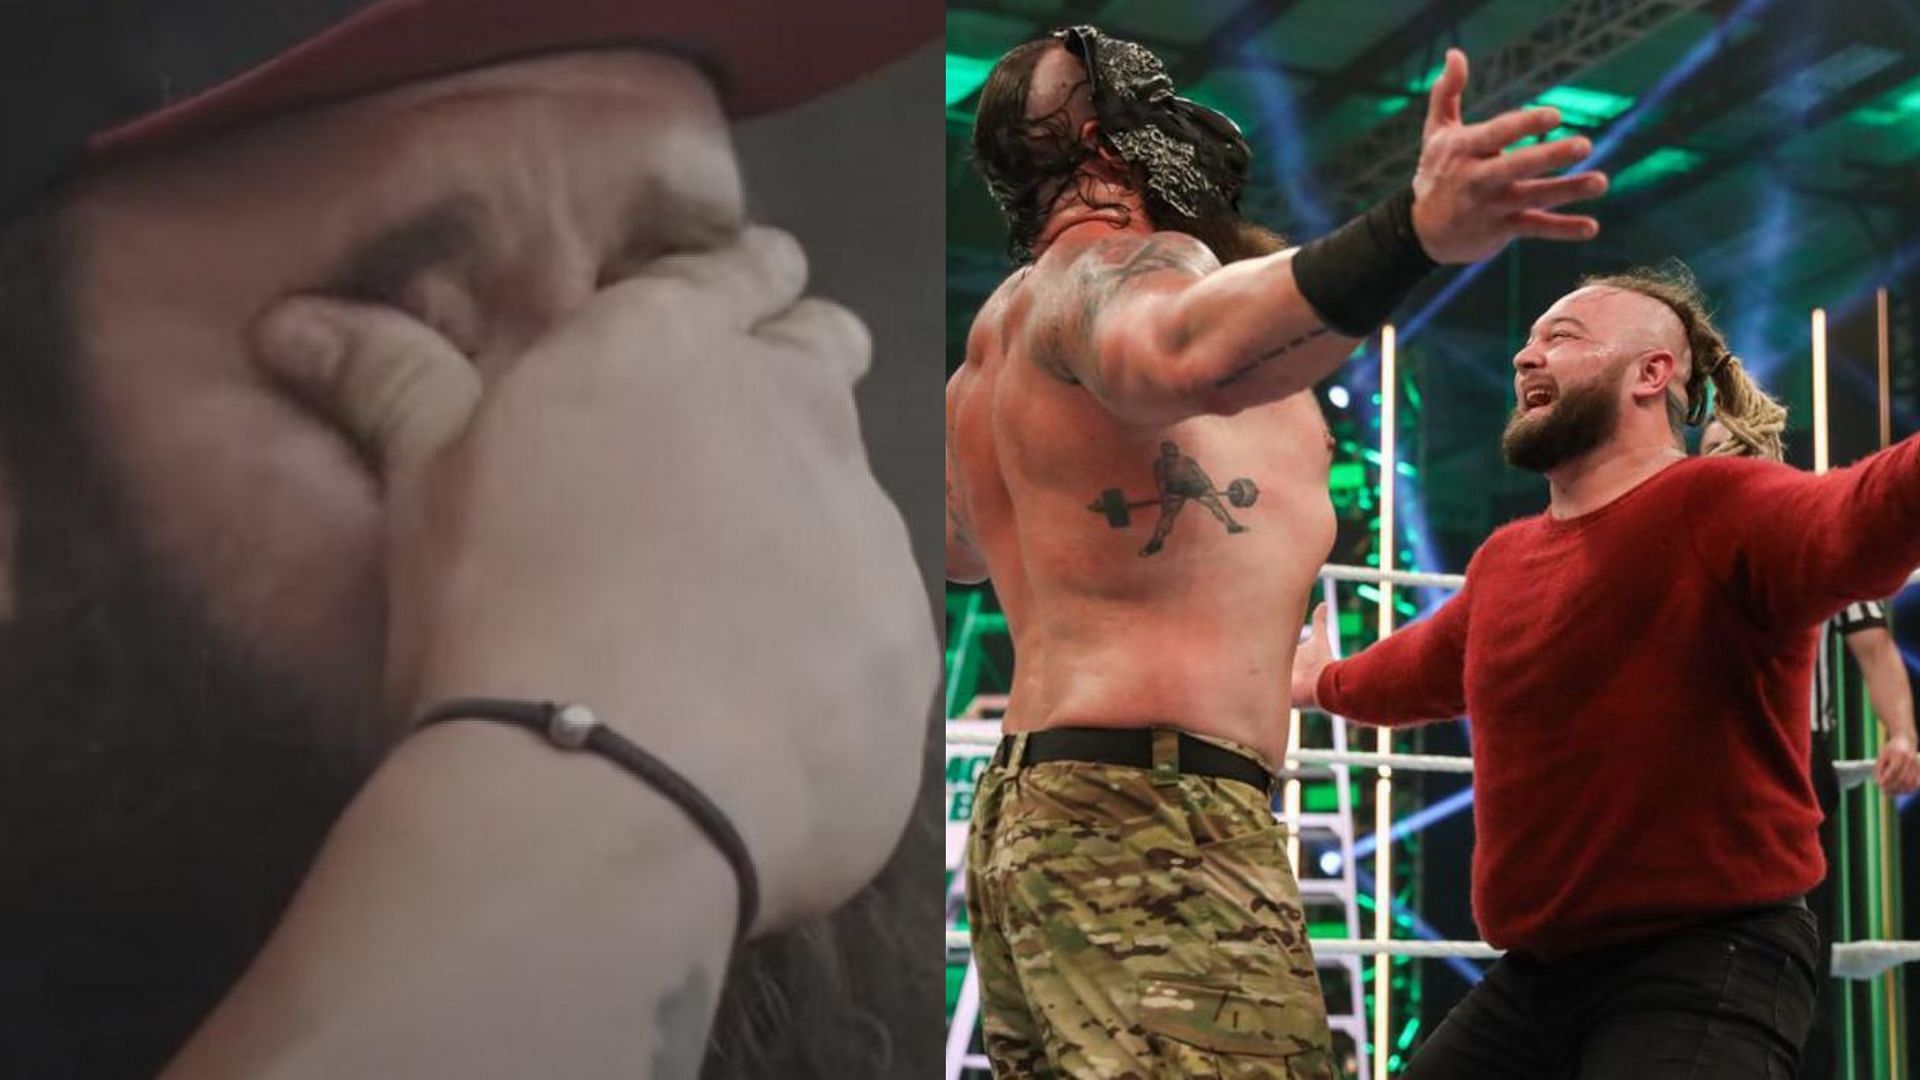 Braun Strowman Takes His Love for Bray Wyatt to the Next Level by